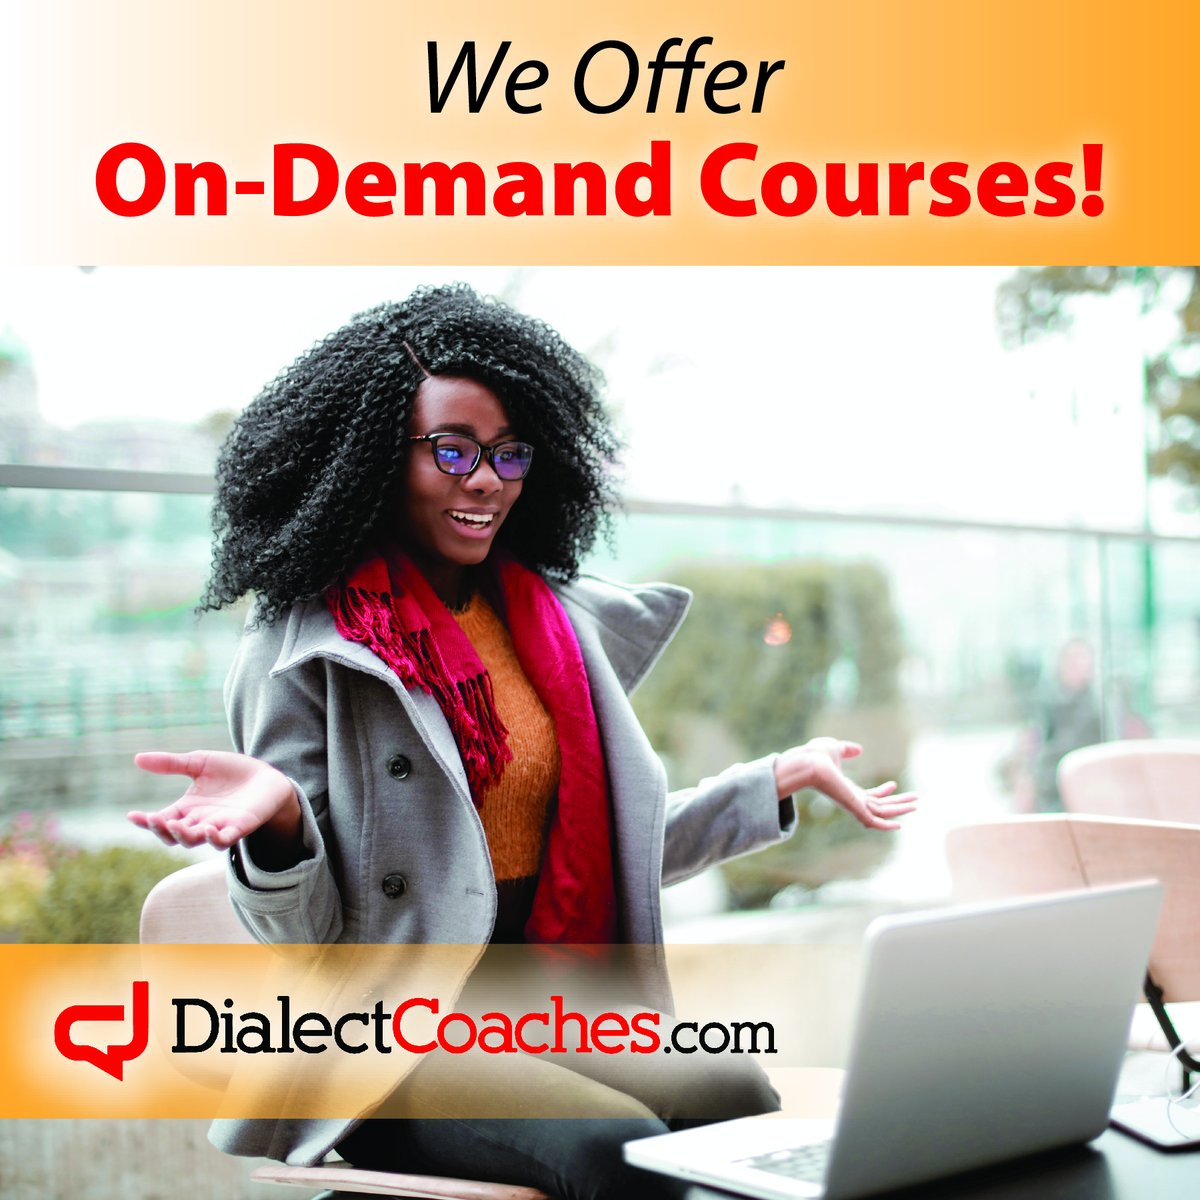 Discover a world of learning possibilities at your convenience! Try one of our on-demand courses today at DialectCoaches.com. #acting #actorlife #actorslife #actorslife🎬 #actor #actors #accents #accentcoach #dialectcoach